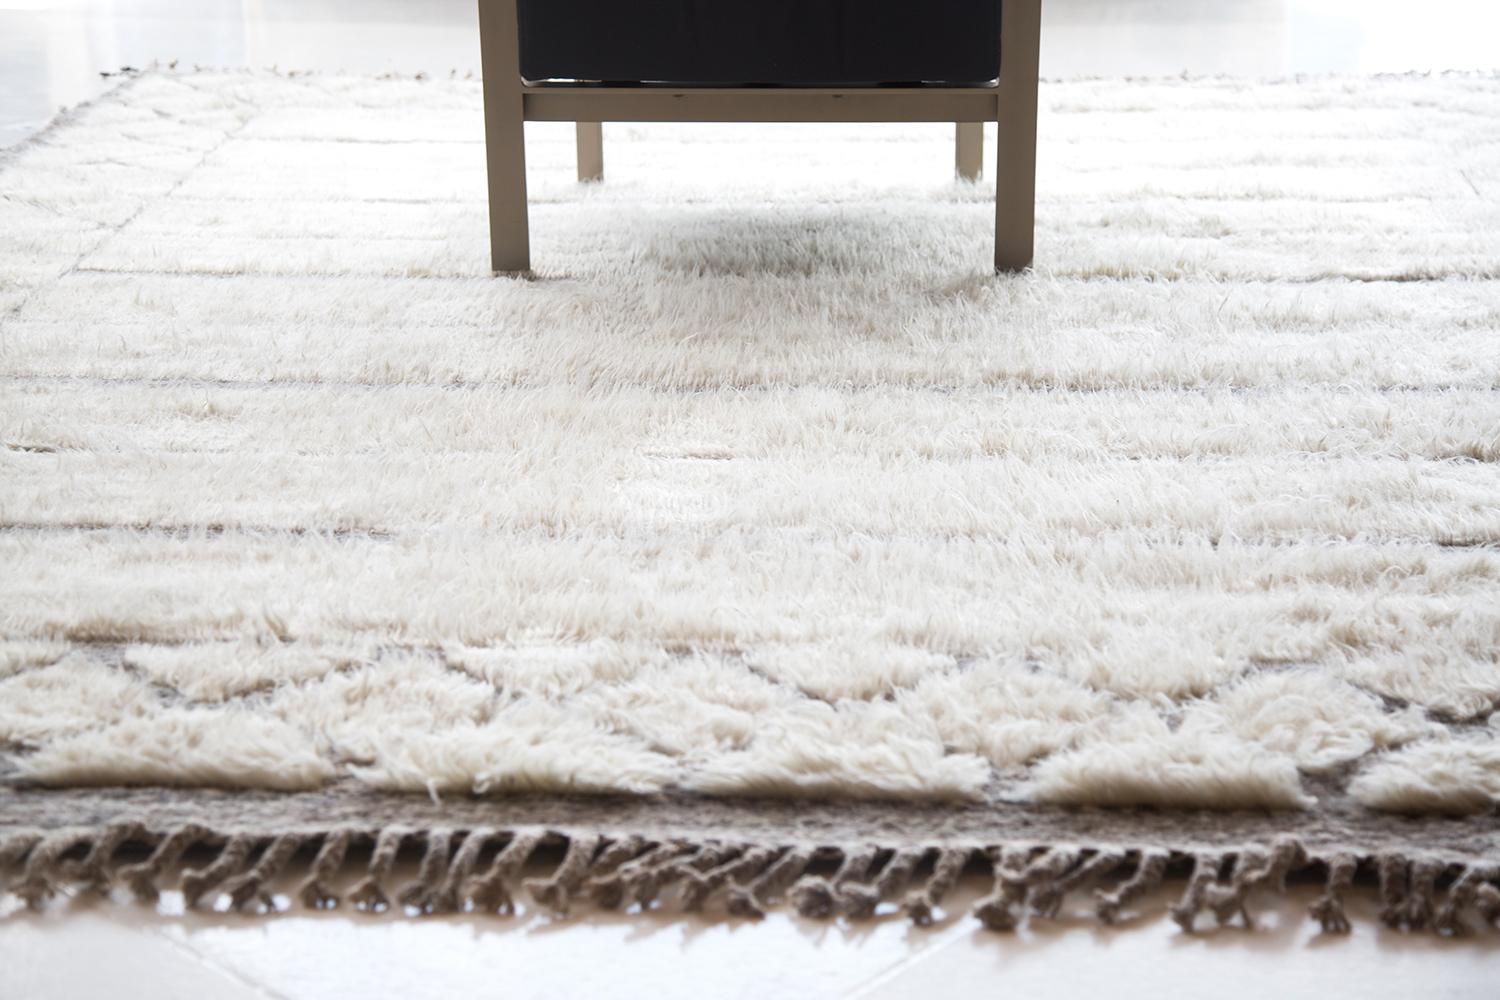 A beautiful and trendy modern Boho Chic rug, rug type / origin: Central Asian rug, date circa modern rug. Size: 8 ft 5 in x 10 ft 6 in (2.57 m x 3.20 m)

This carpet says boho chic with a surprising modern twist. The inspiration for this carpet